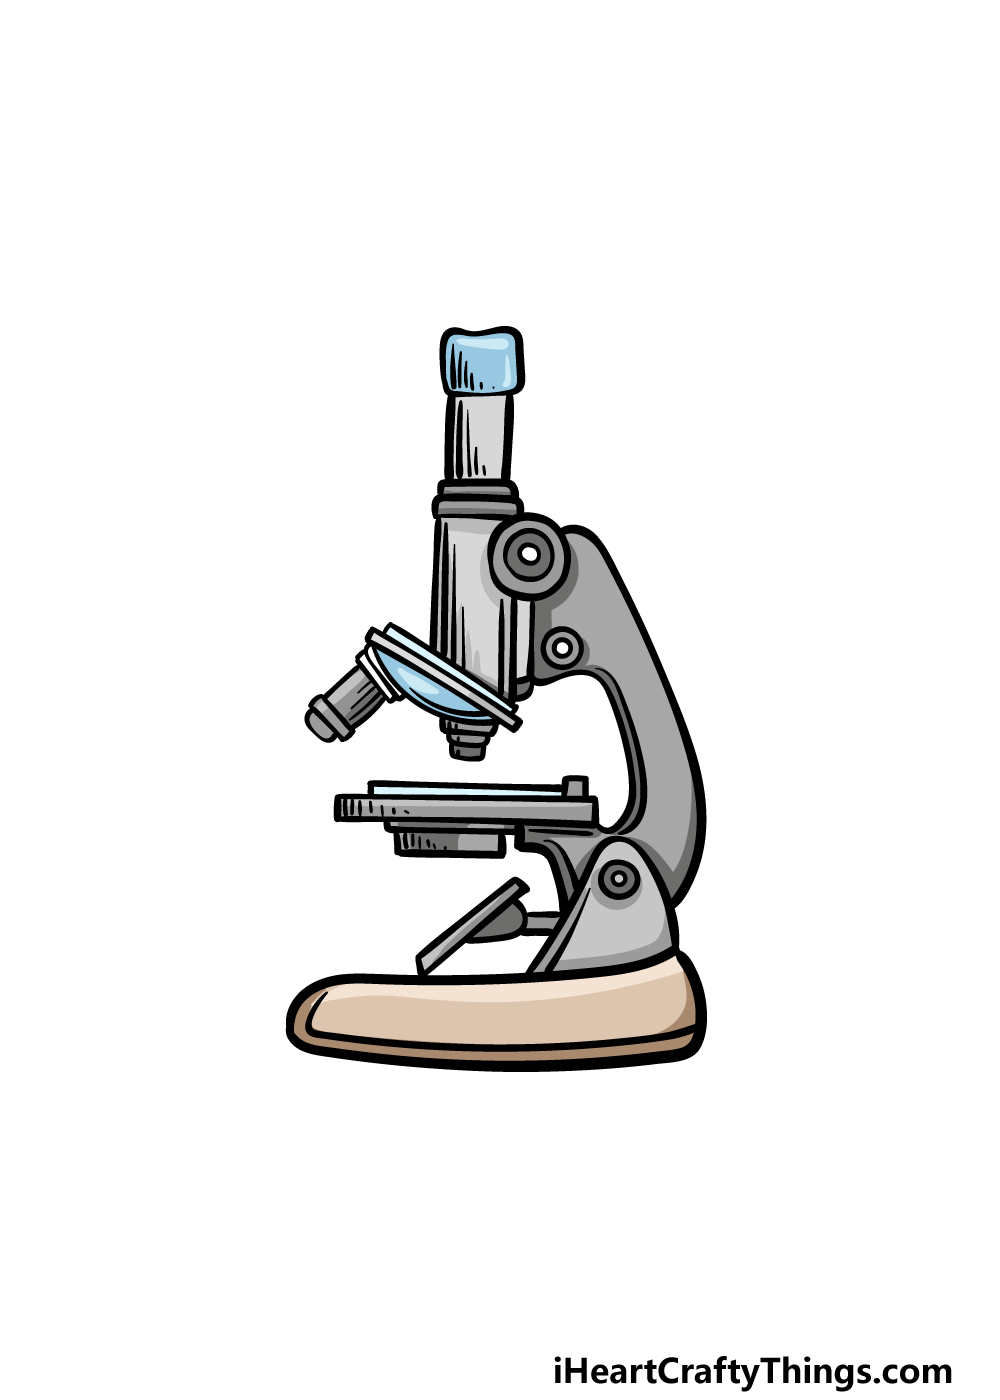 Share 77+ microscope drawing with label super hot - xkldase.edu.vn